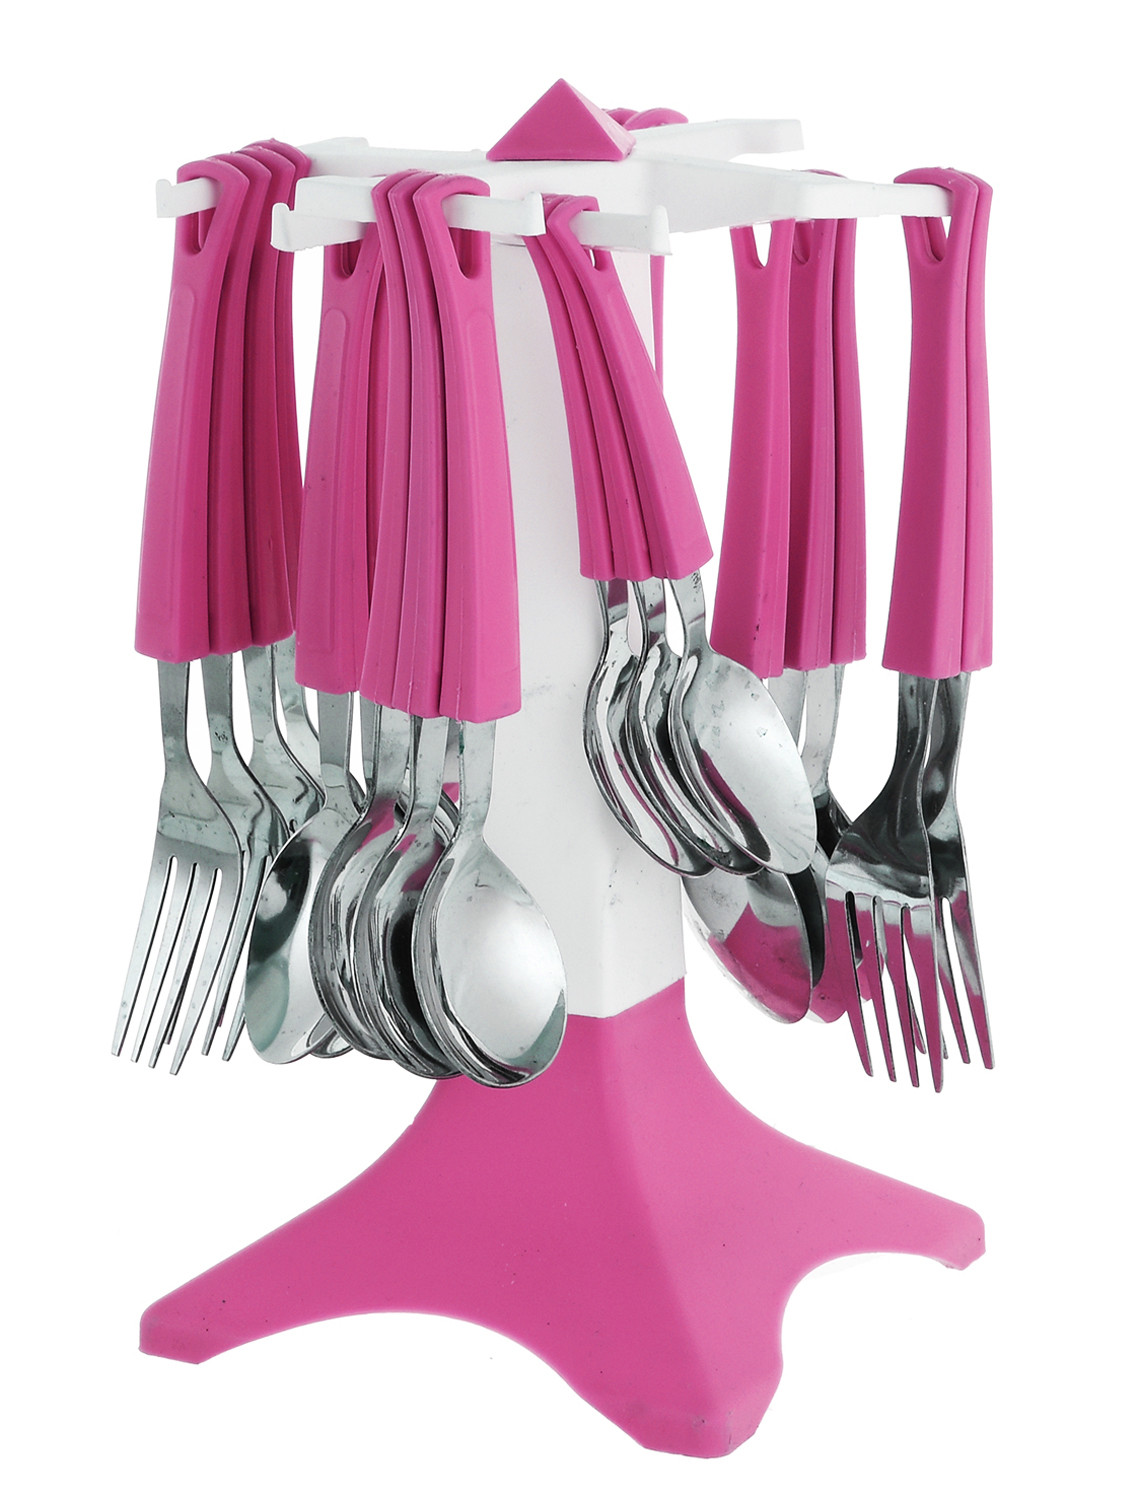 Kuber Industries Swastic Cutlery Set 24 pcs with Stand Made from Stainless Steel and ABS Plastic (Pink) -CTKTC39440